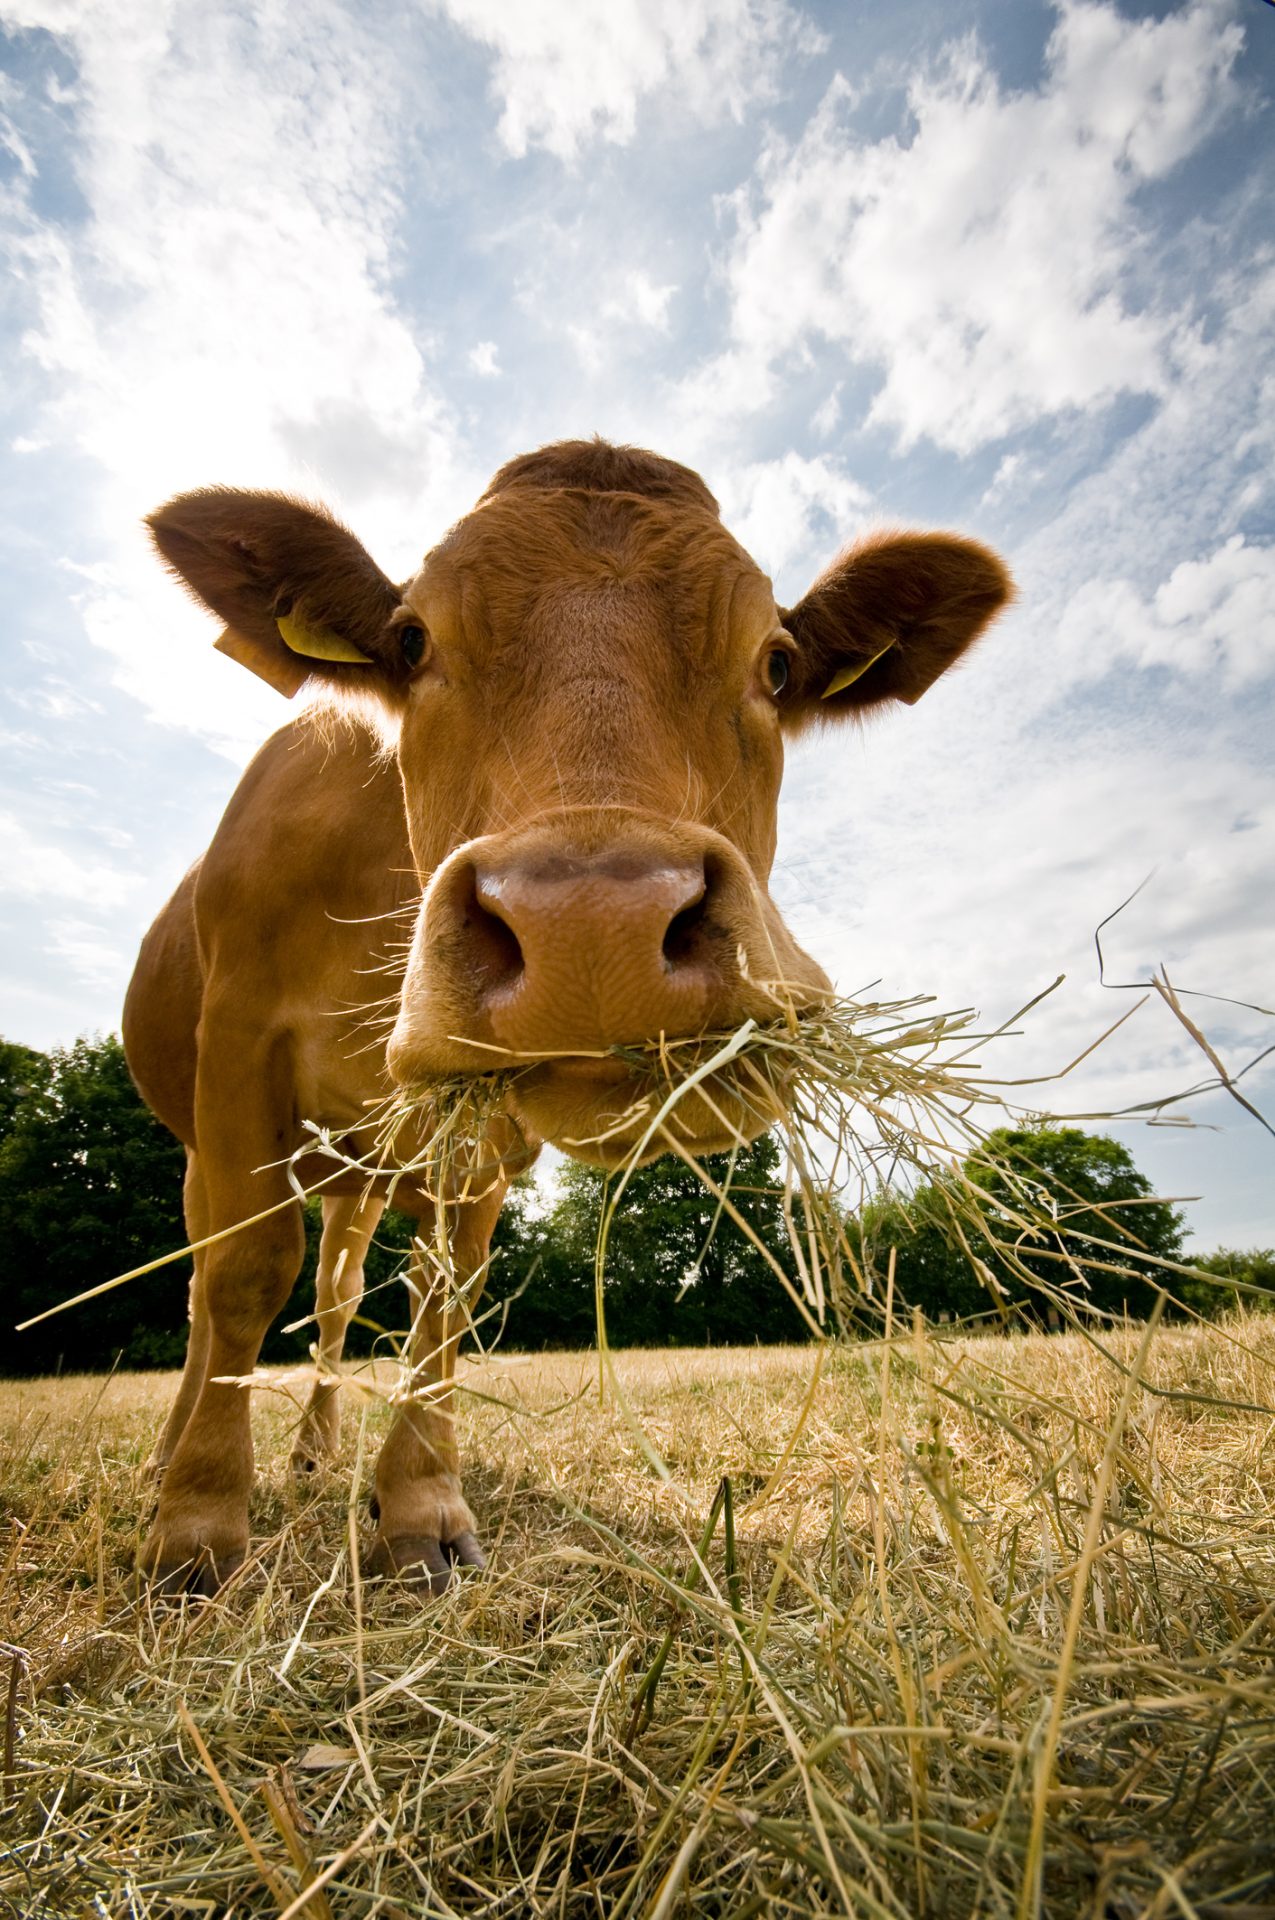 This is a close up photo of a cow eating hay.